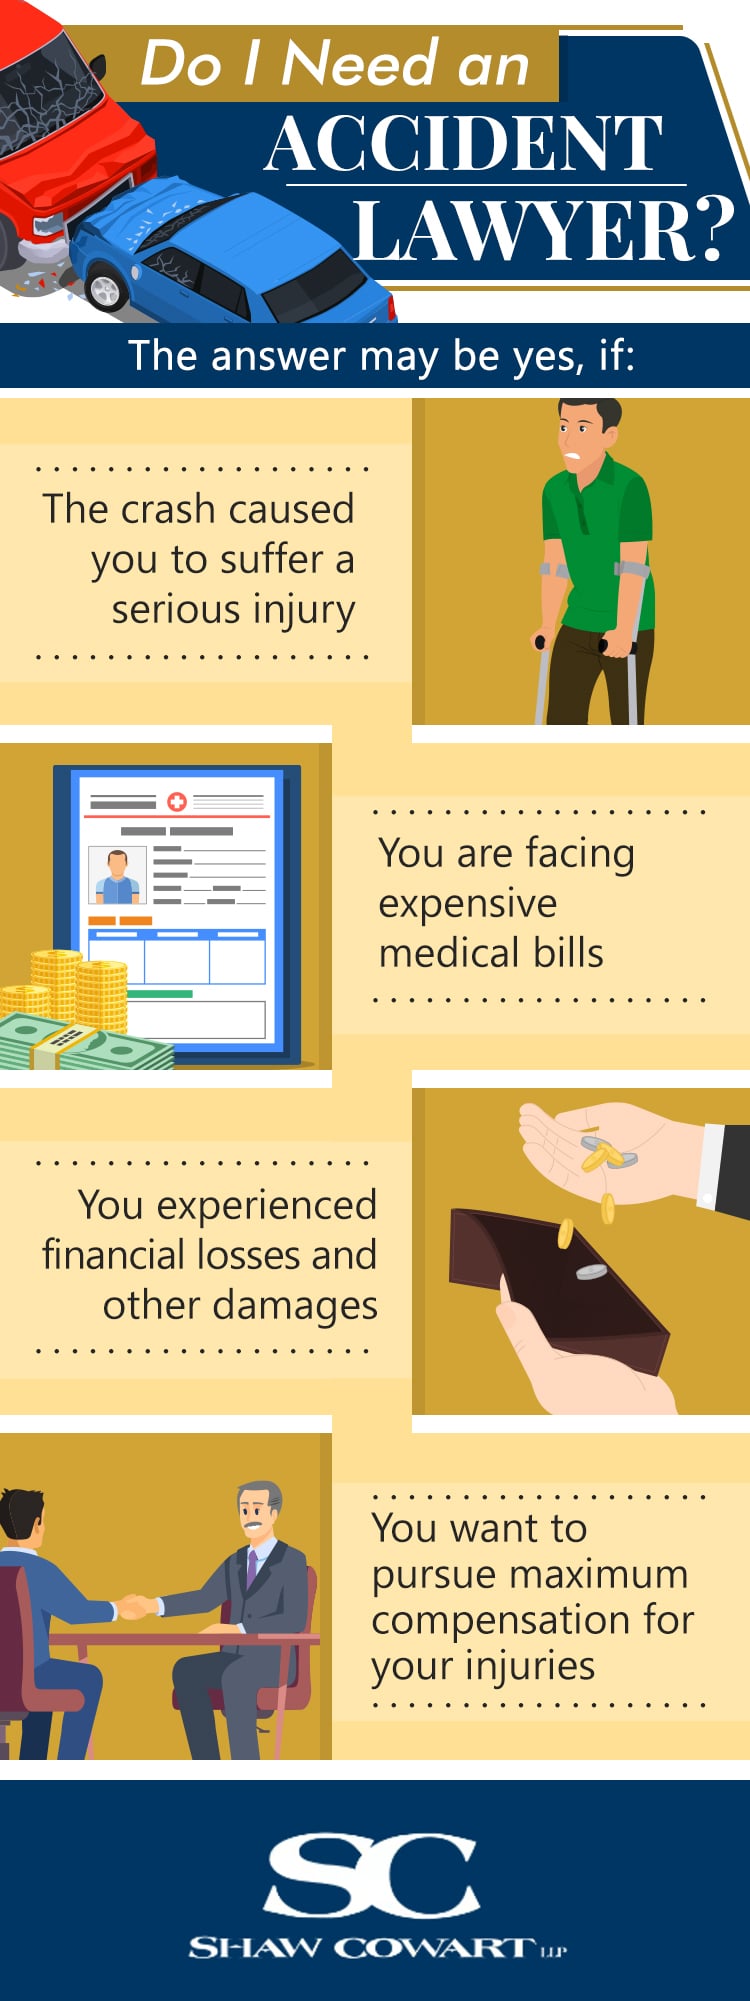 An infographic discussing Do I need an accident lawyers